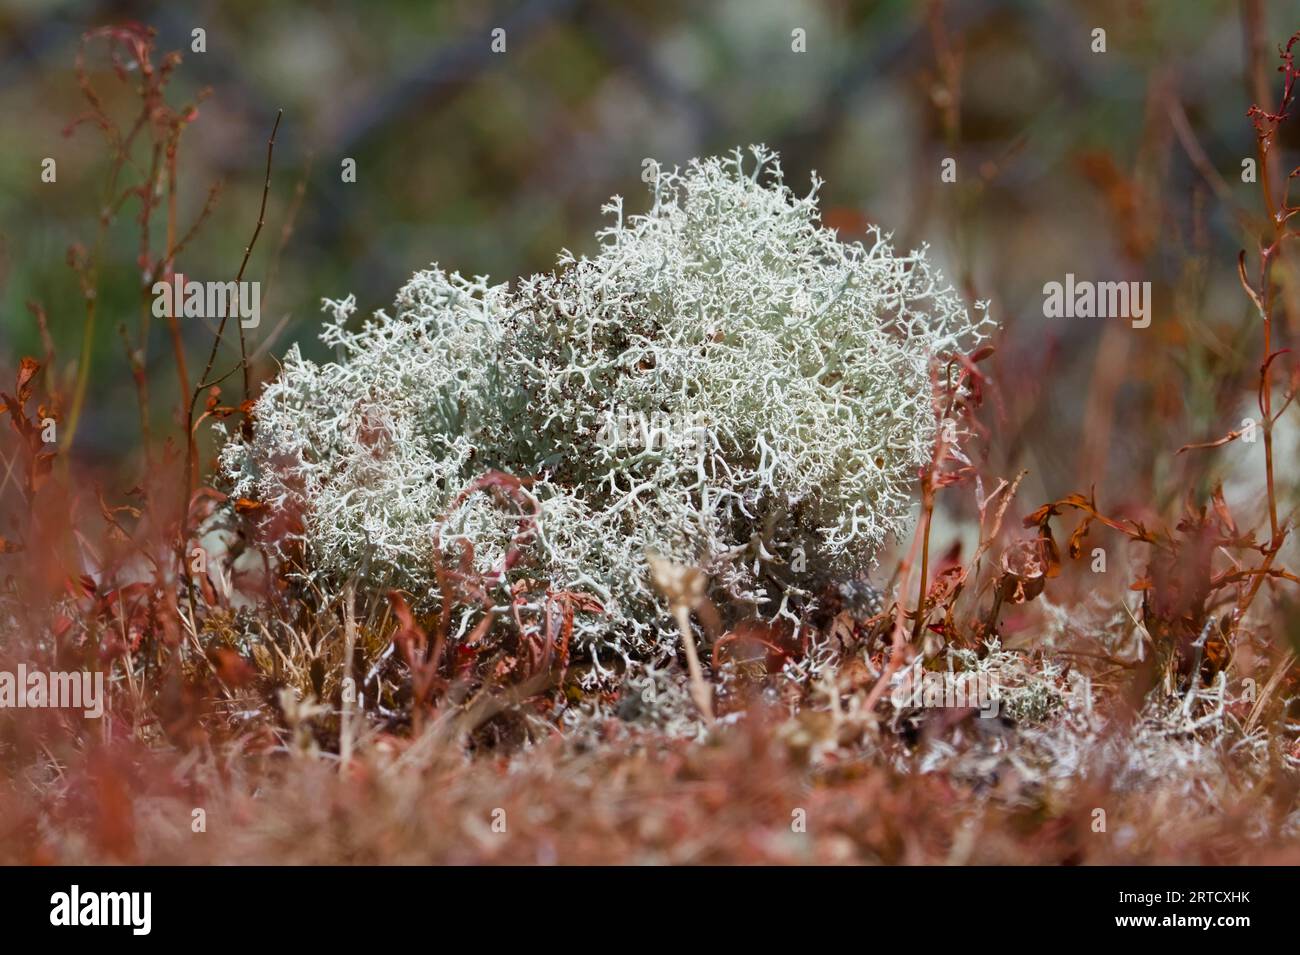 Renne Lichen, Cladonia rangiferina Growing on the Growing, New Forest, Inghilterra Regno Unito Foto Stock